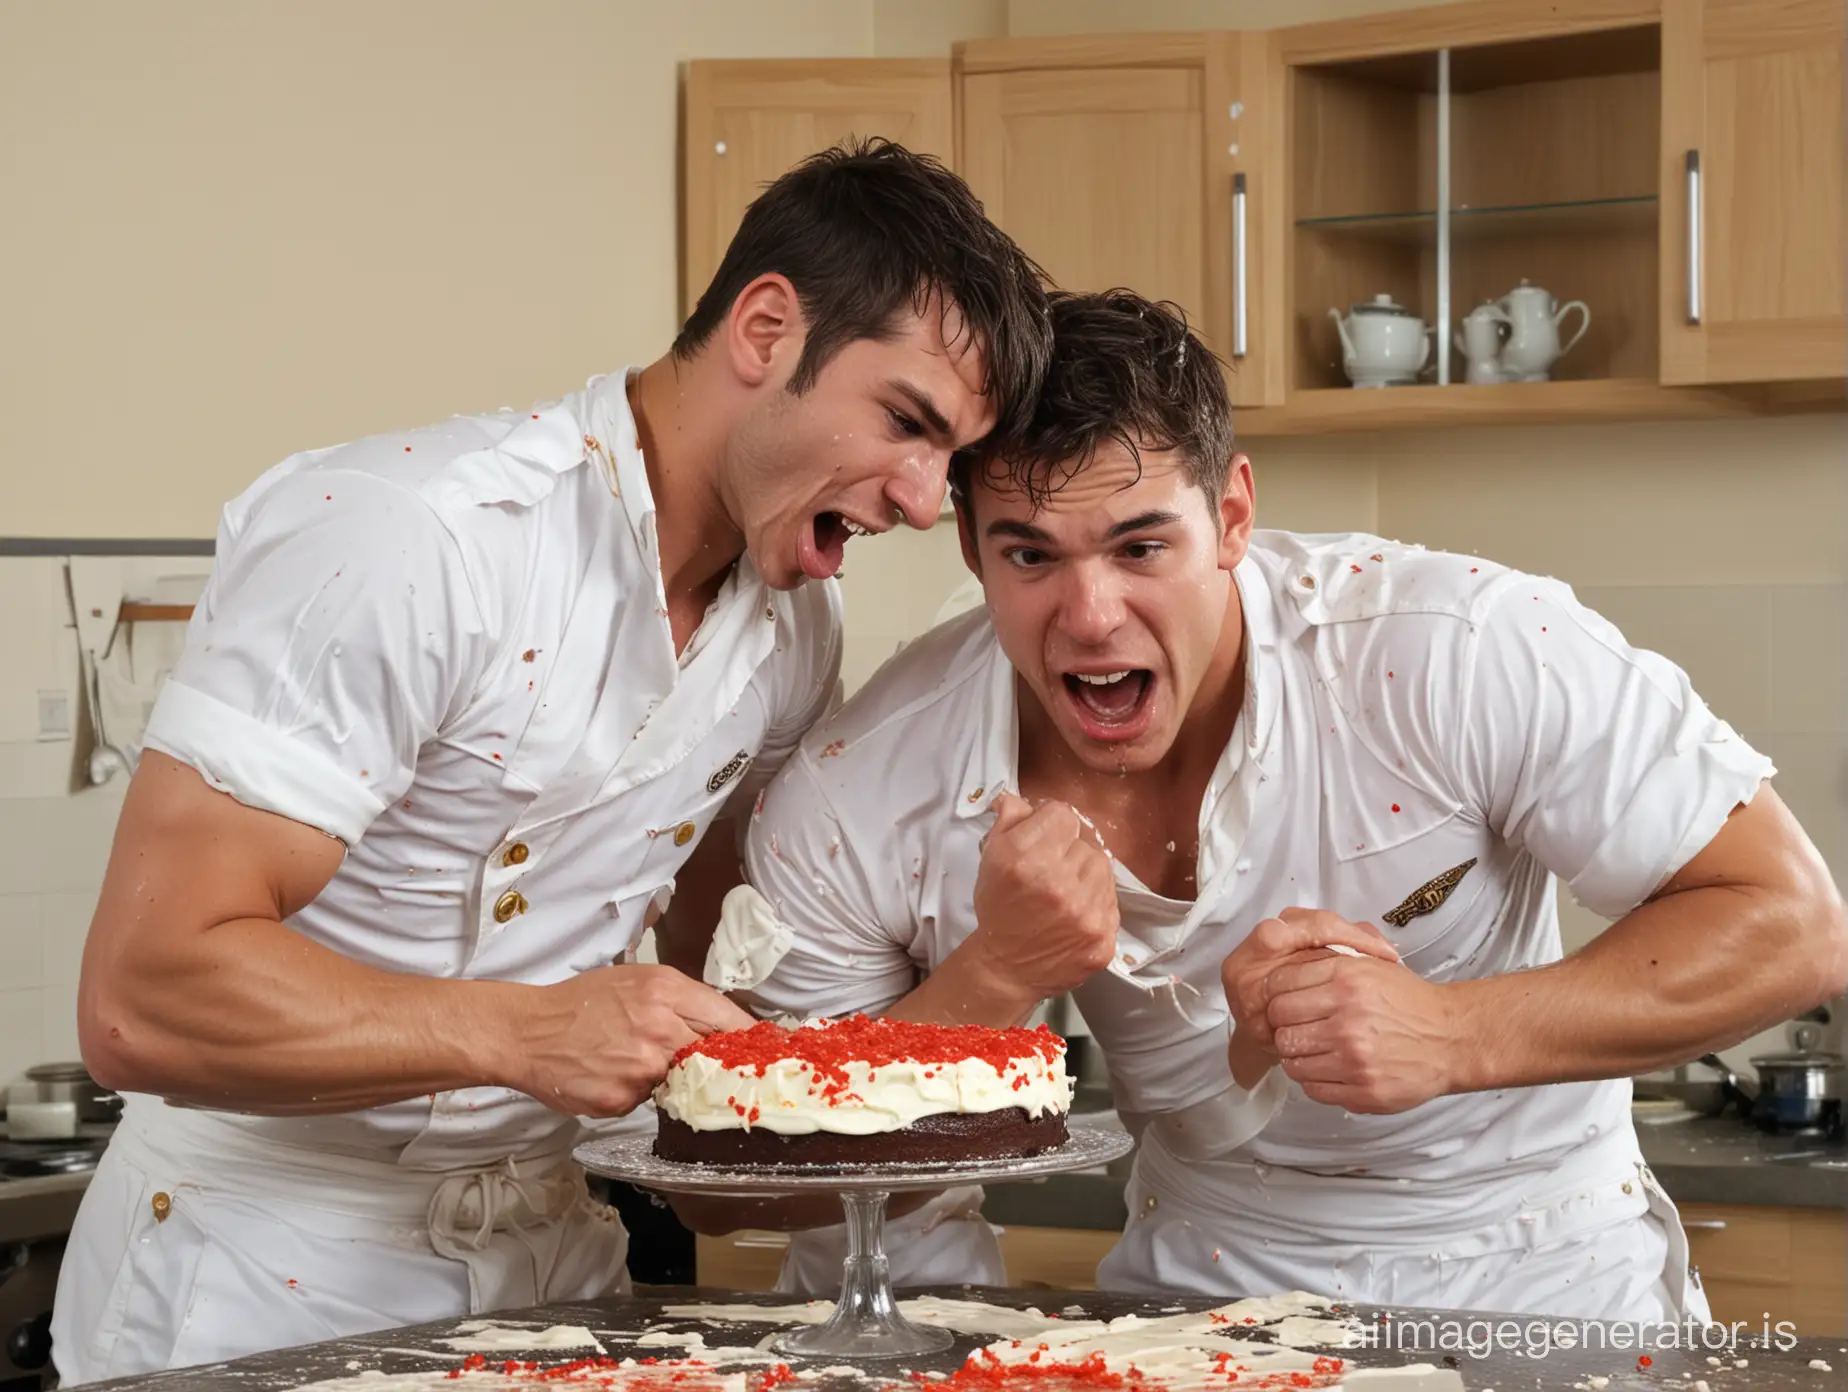 Muscular-Sailors-Engage-in-Cake-Wrestling-and-Fist-Fight-in-Kitchen-Chaos